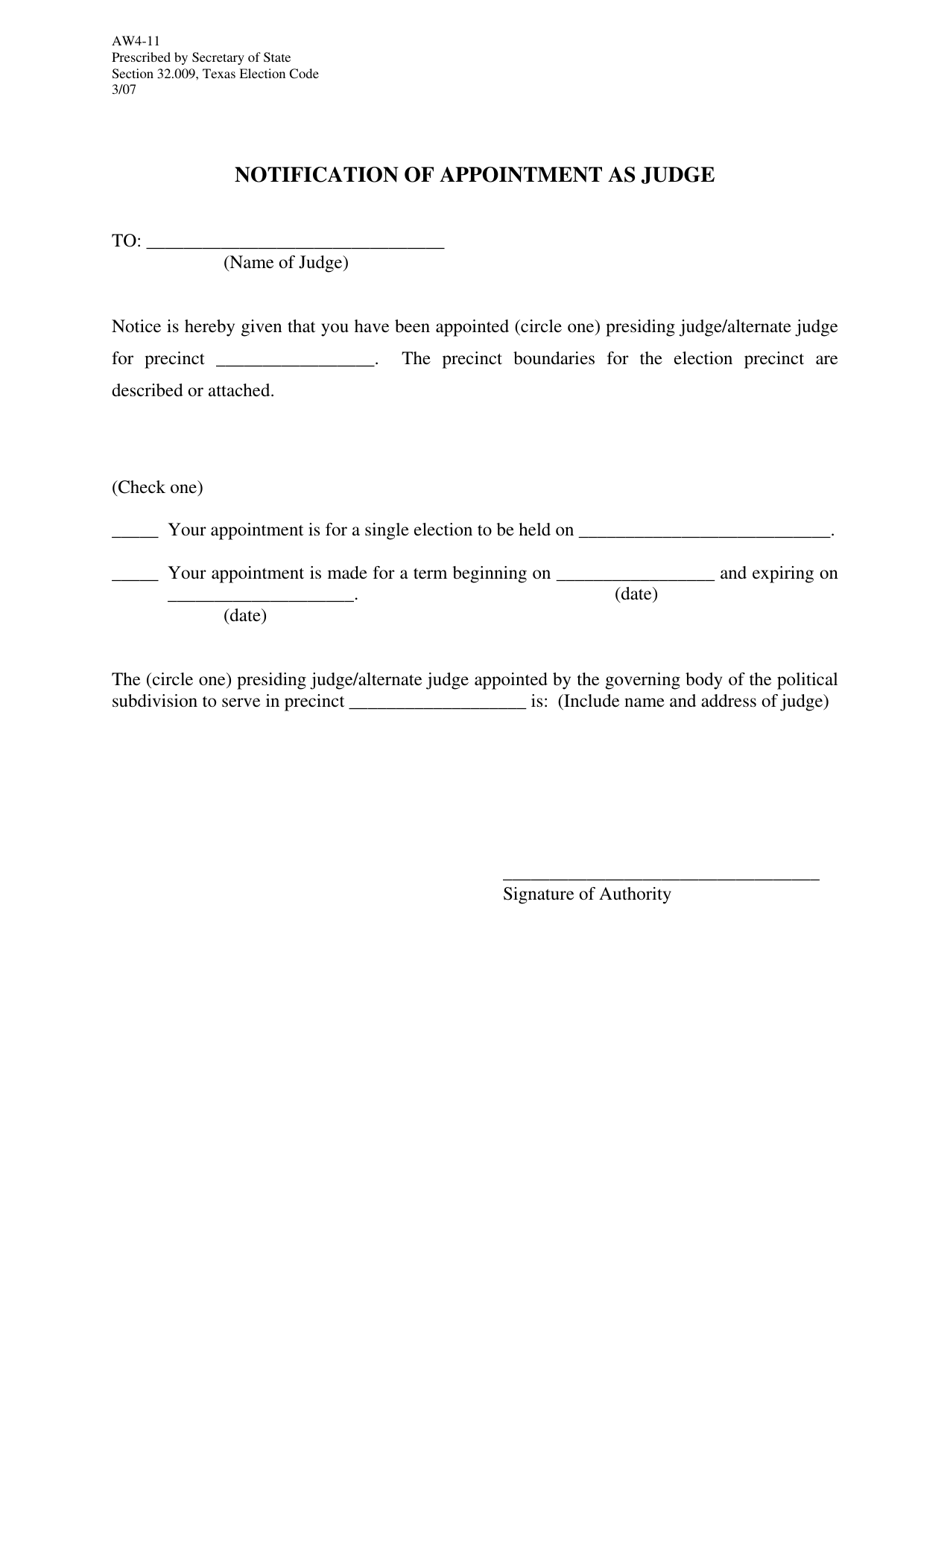 Form AW4-11 Notification of Appointment as Judge - Texas, Page 1